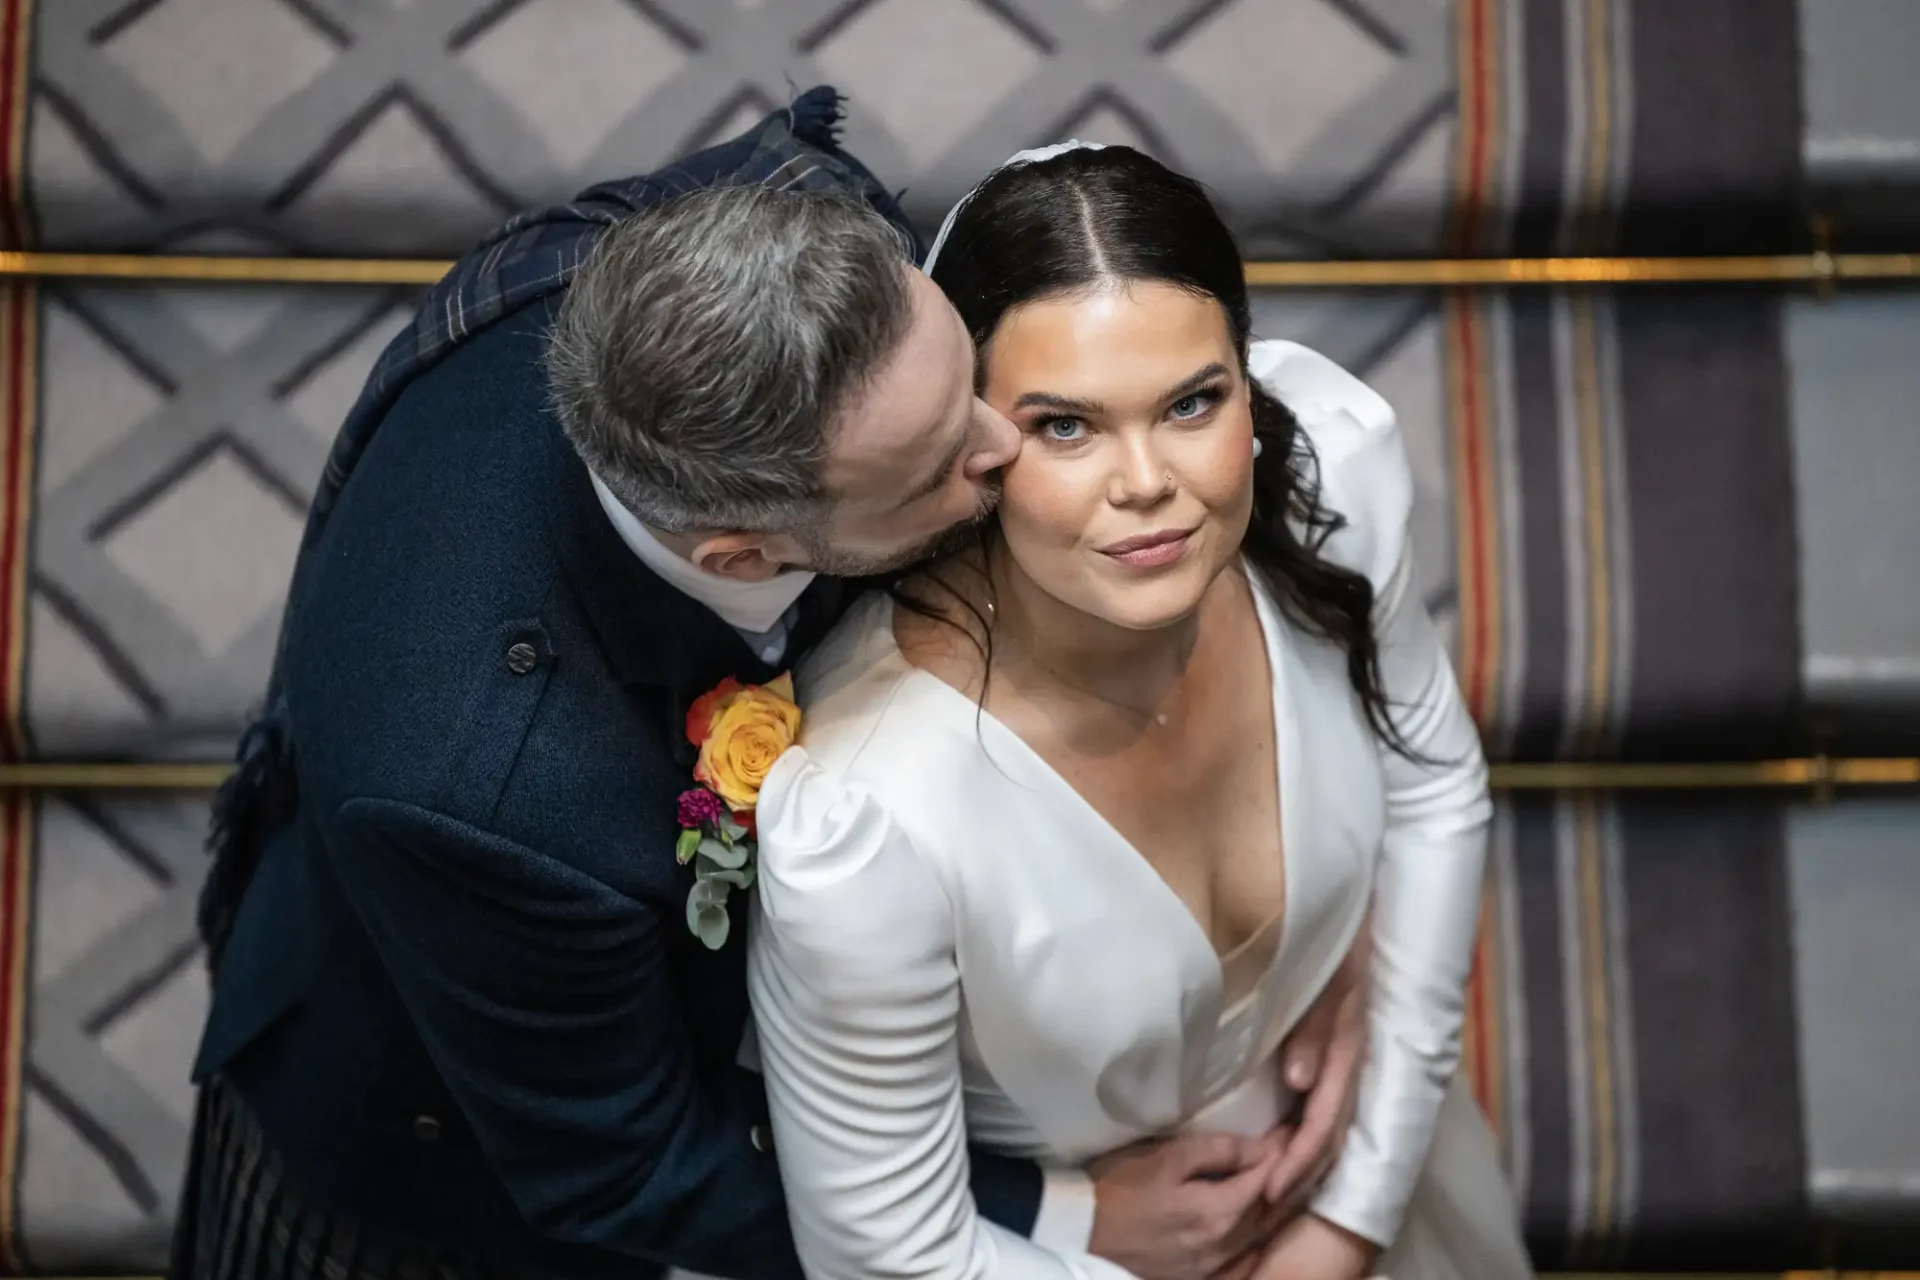 A groom in a dark suit kisses the cheek of a bride in a white dress. they are sitting on a patterned couch with a warm embrace.